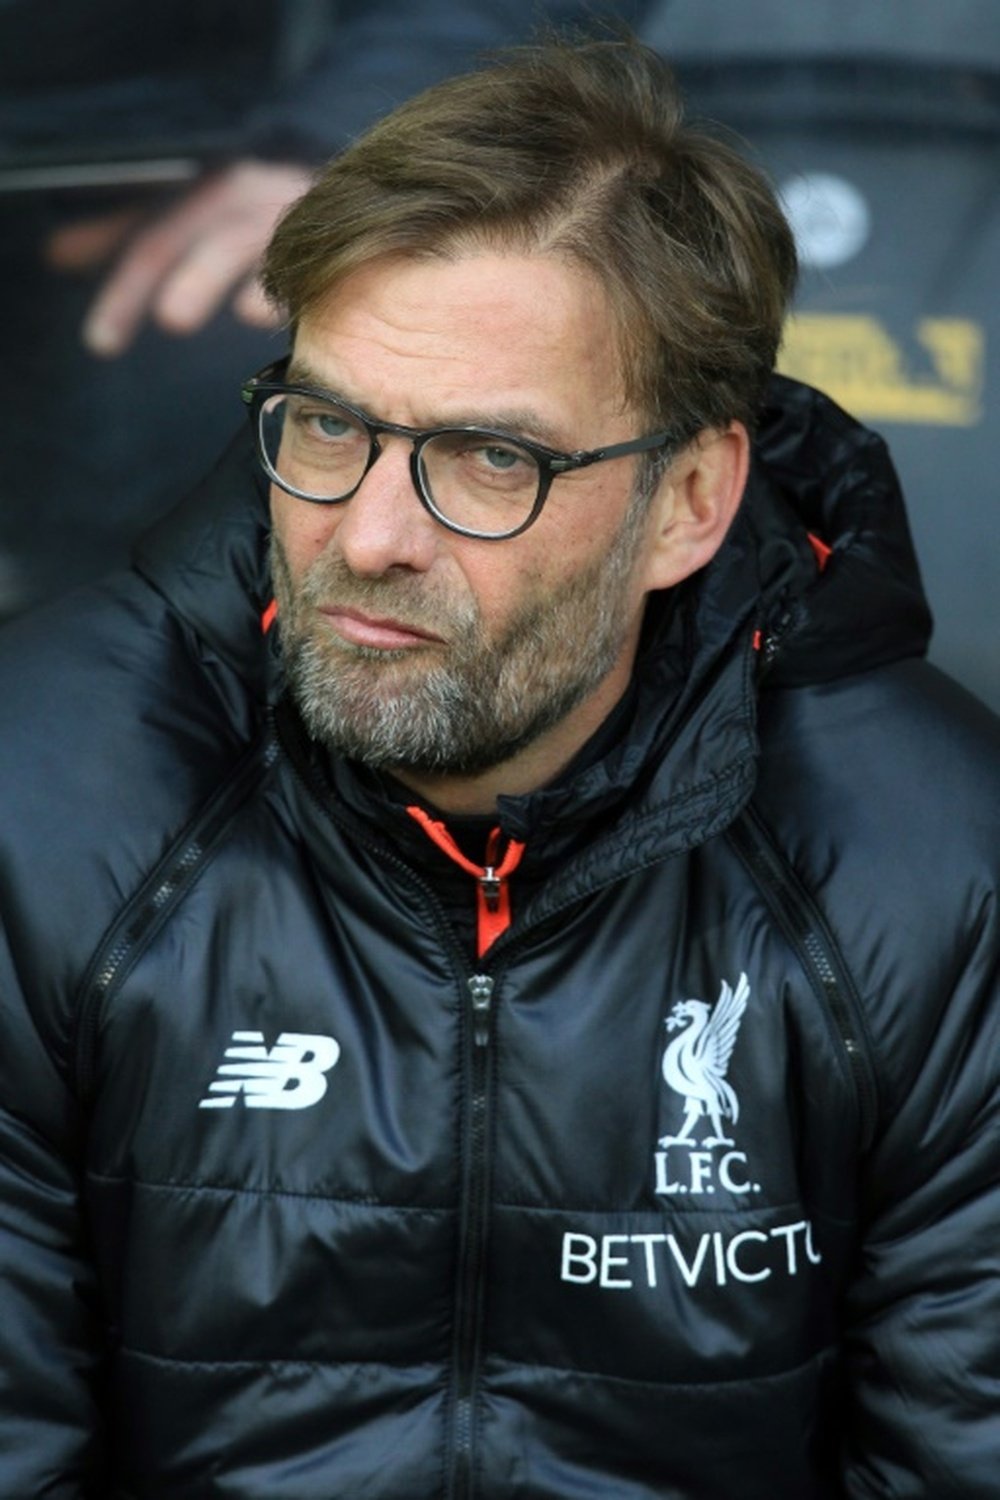 Klopp's side look tired and overwhelmed.